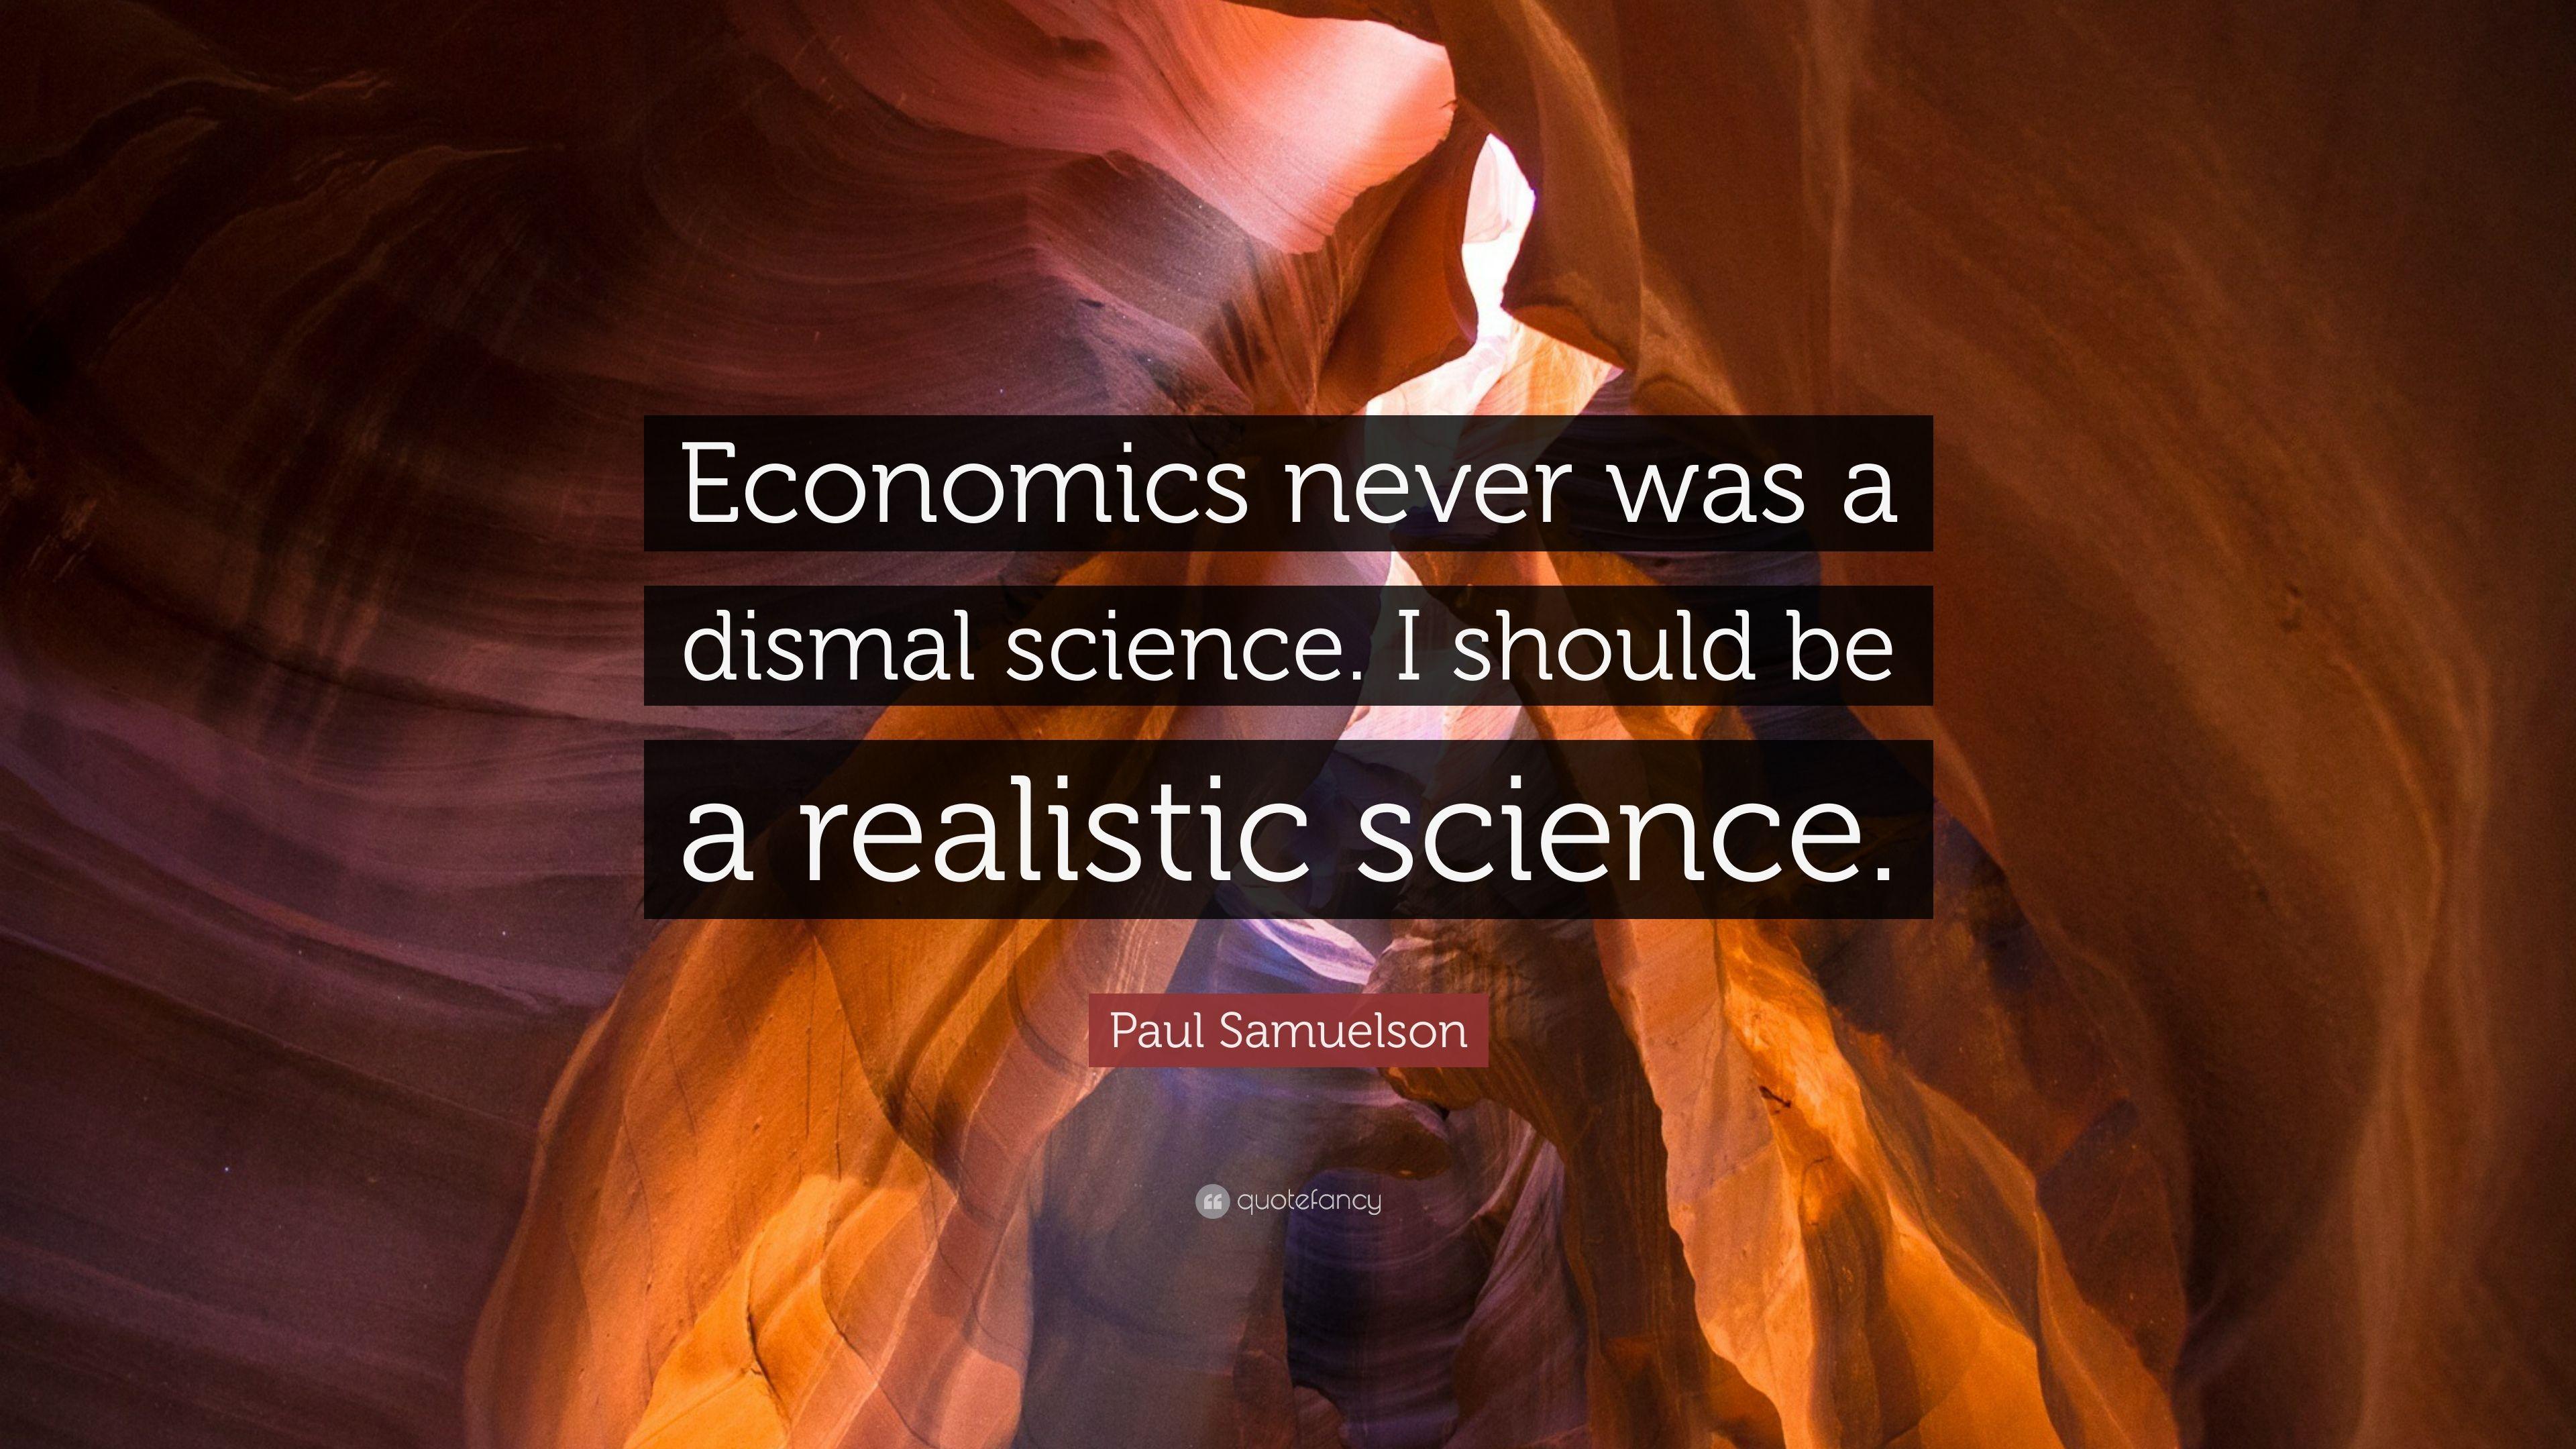 Paul Samuelson Quote: “Economics never was a dismal science. I